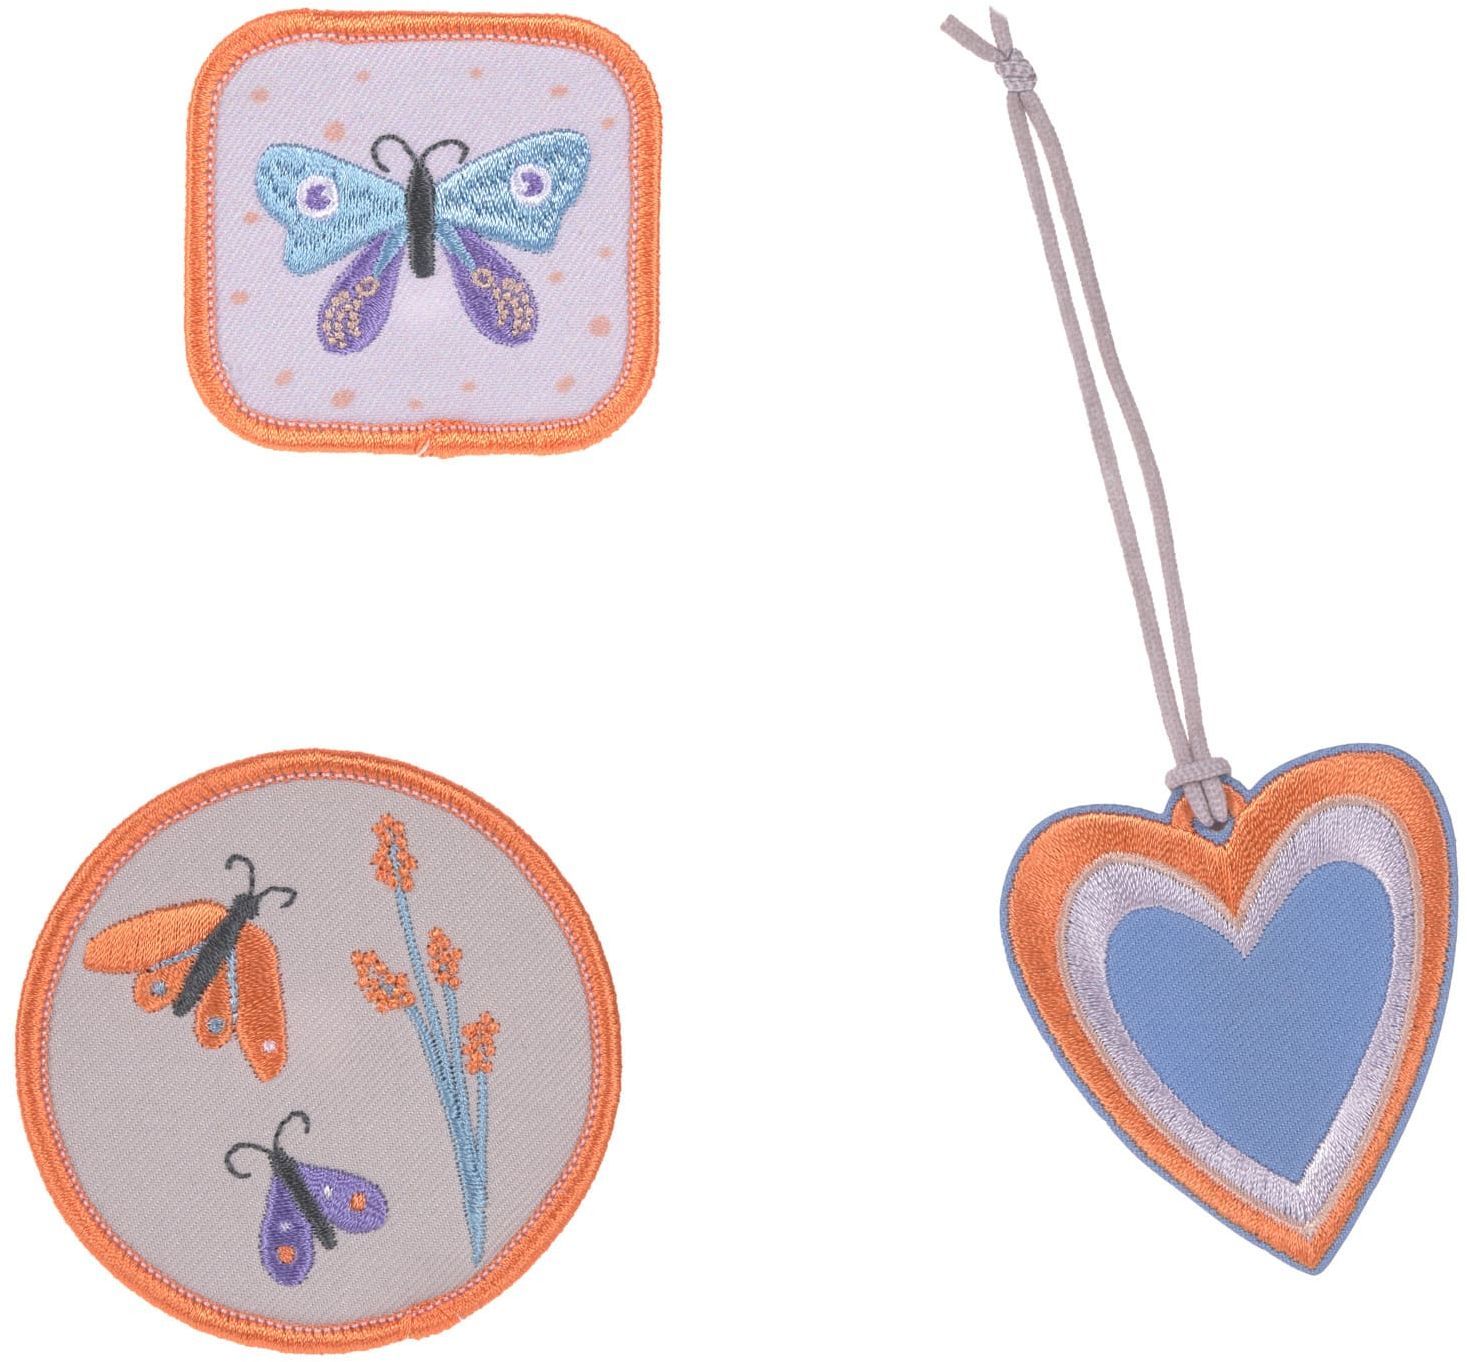 Lassig School Patches set Butterfly